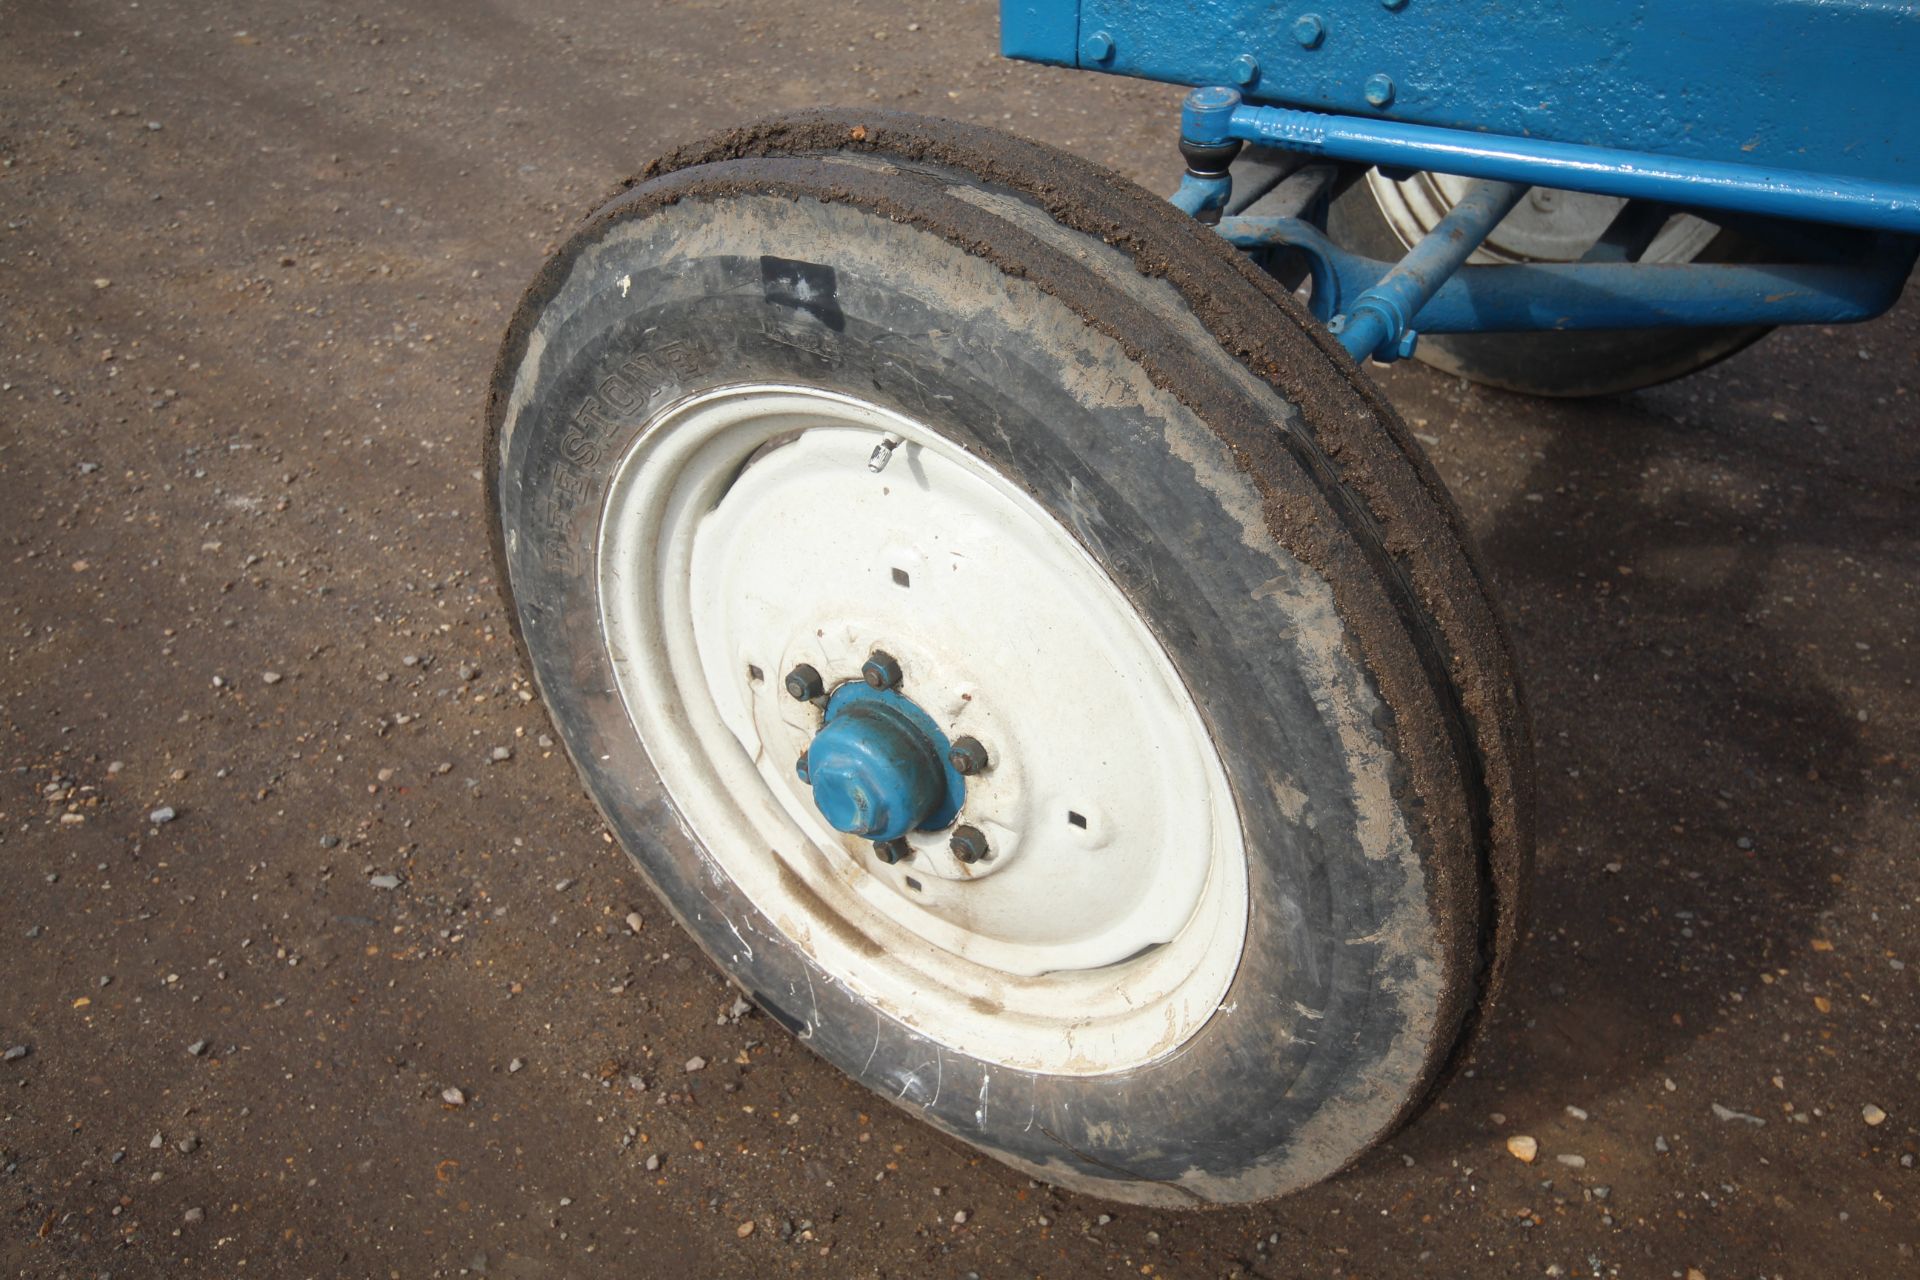 Fordson New Performance Super Major 2WD tractor. 12.4-36 rear wheels and tyres @ 99%. Key held. - Image 37 of 47